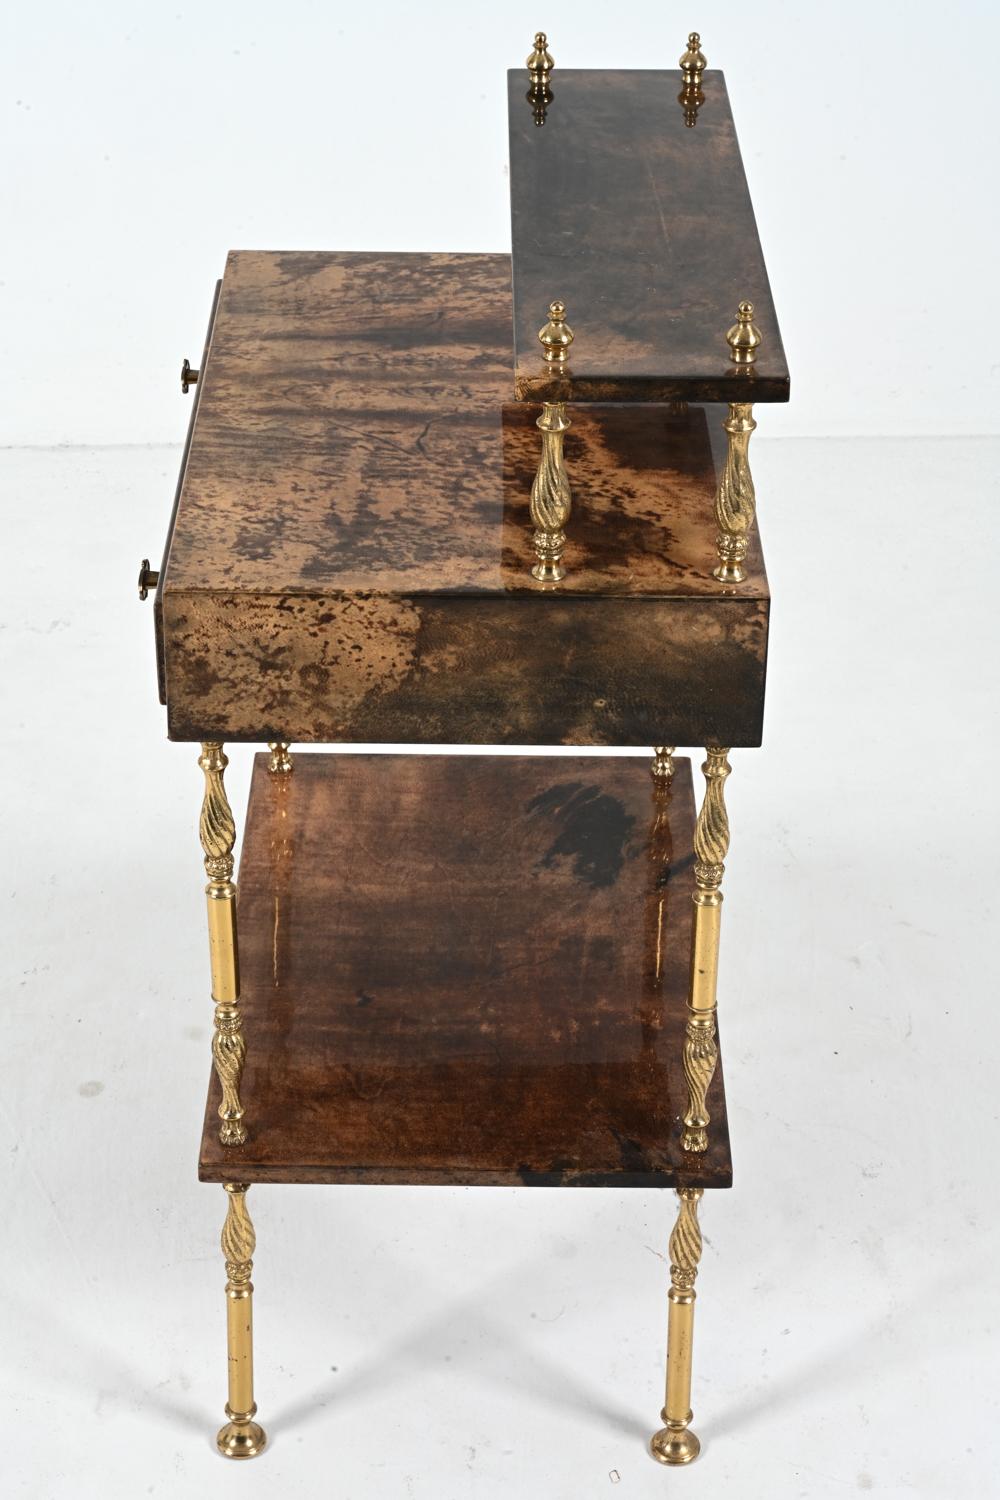 Aldo Tura Lacquered Goatskin & Brass Occasional Table, c. 1960's For Sale 6